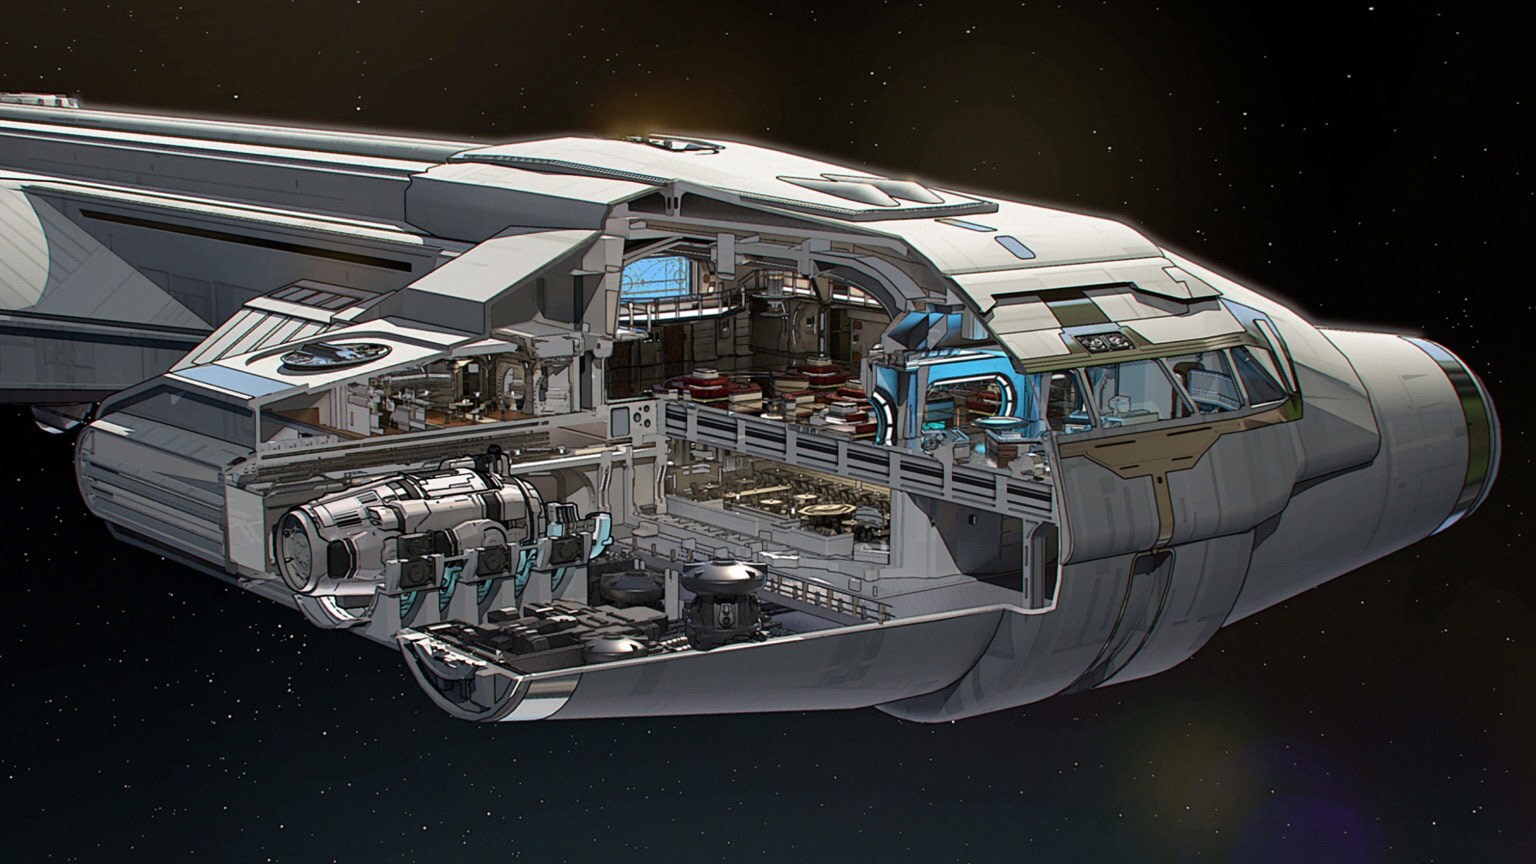 Ships of the Galaxy: The Halcyon Starcruiser